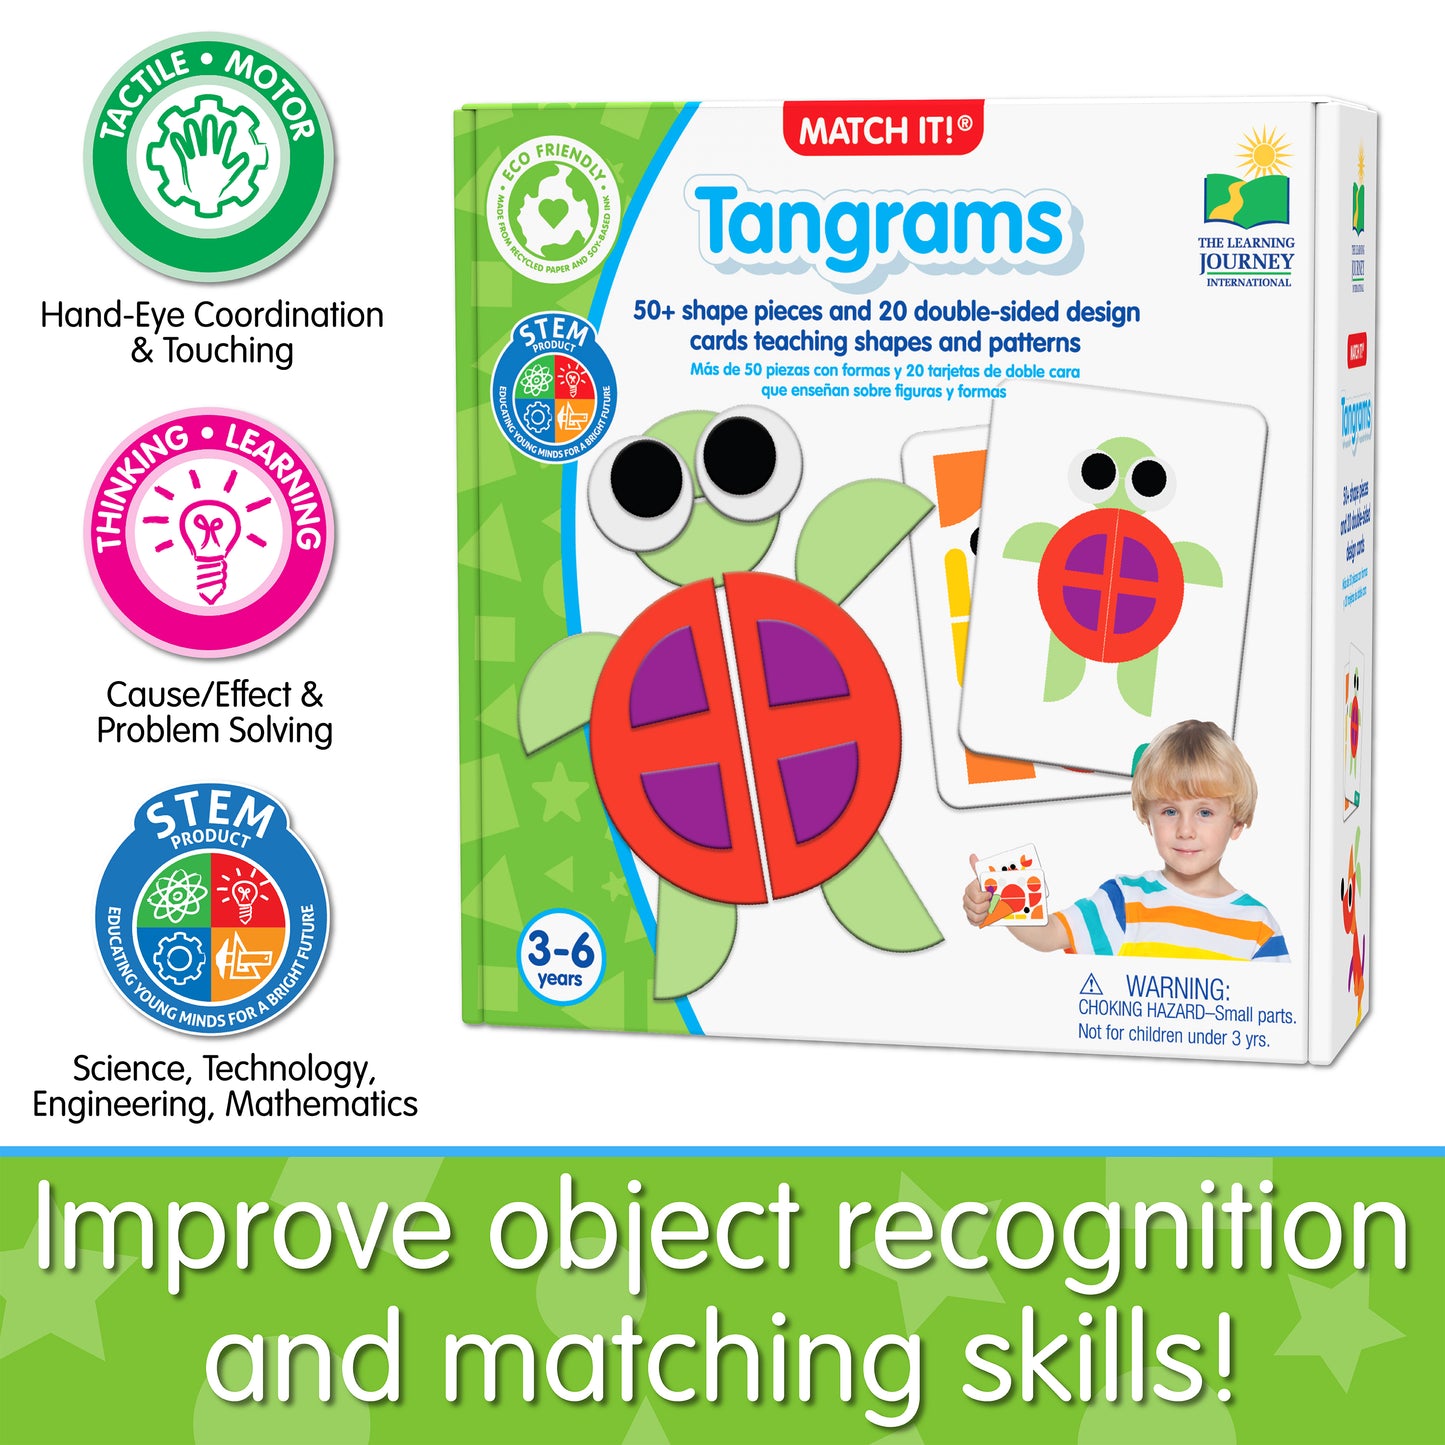 Infographic about Match It - Tangrams' educational benefits that says, "Improve object recognition and matching skills!"